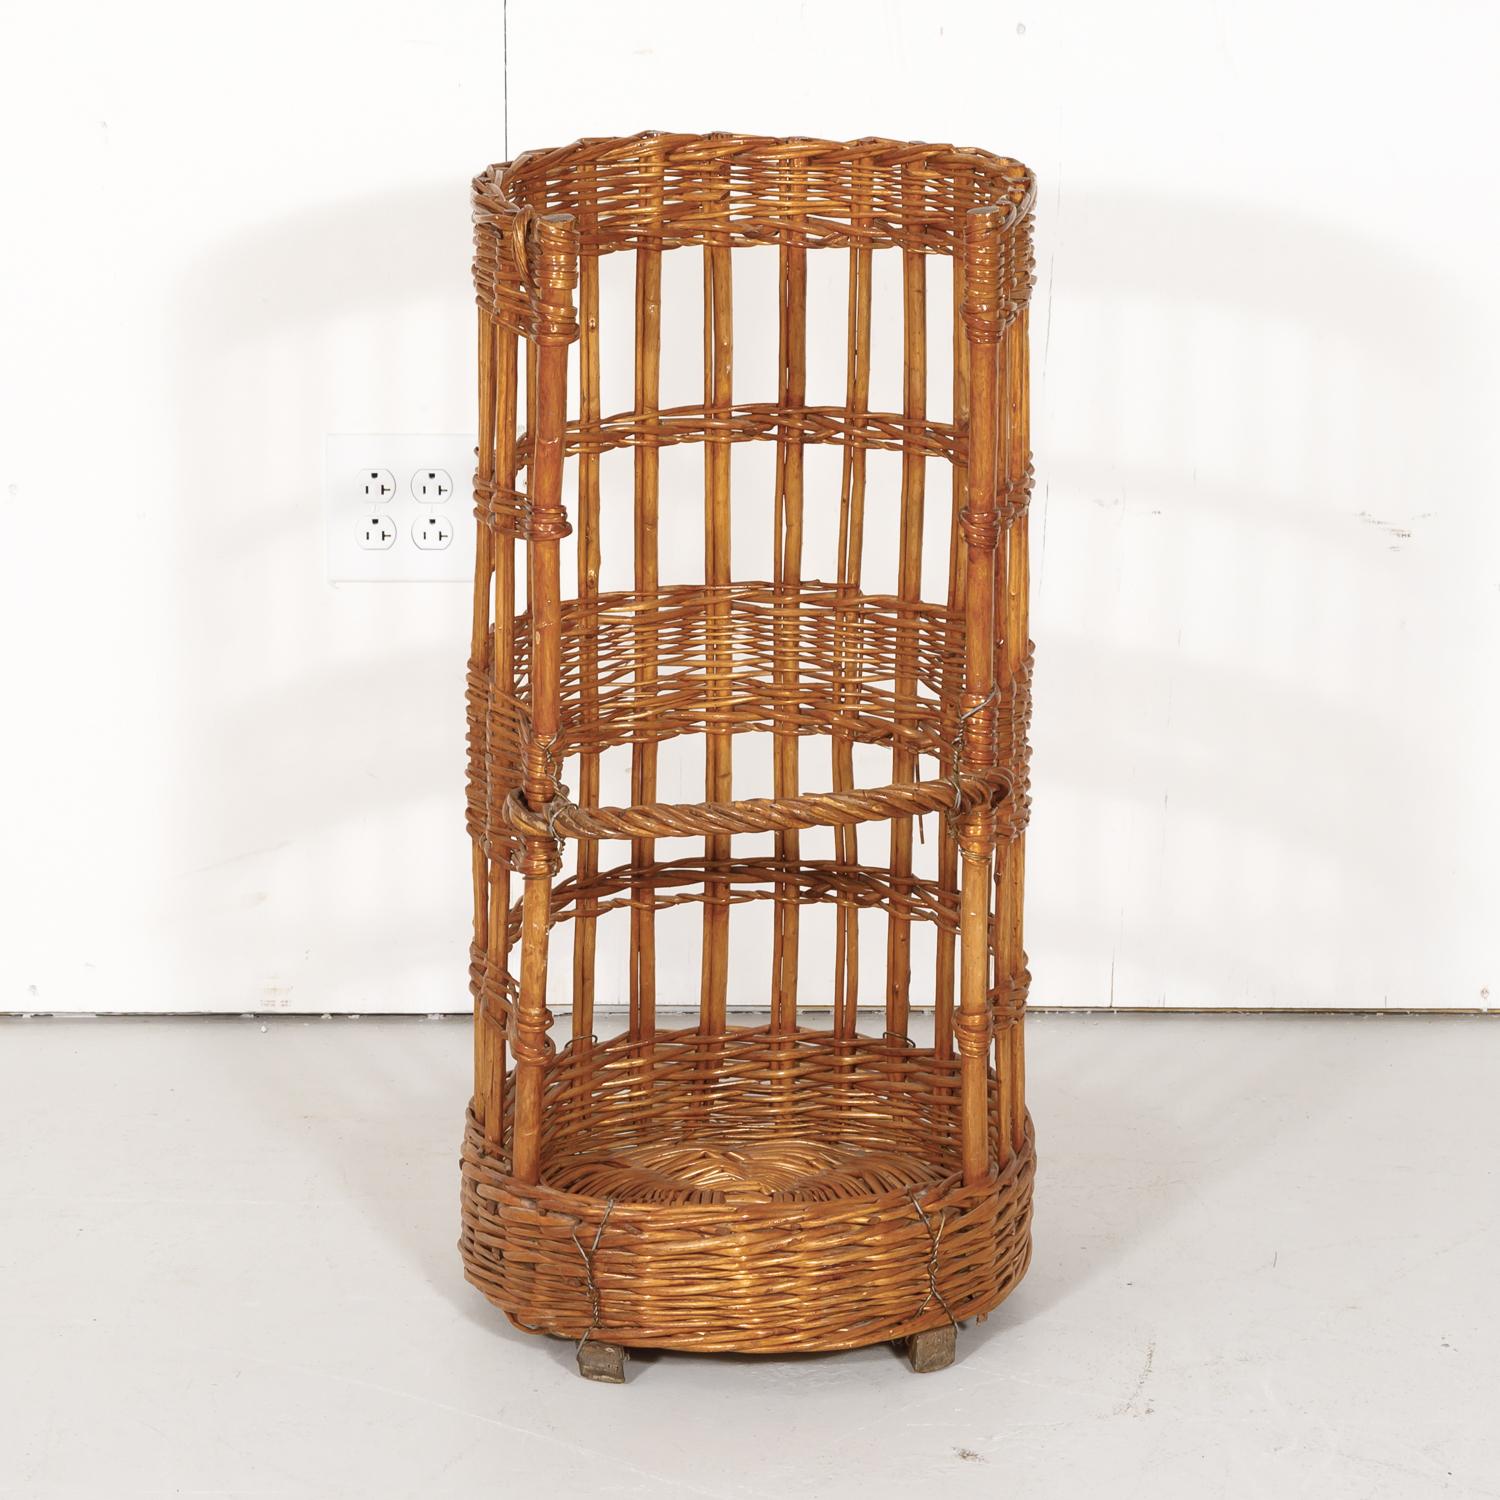 Hard to find open-sided French standing baguette bread basket, circa early 1900s. This semicircle willow basket with a lovely color and aged patina was used to showcase freshly baked baguettes in a French boulangerie. Wooden slat bottom runners for